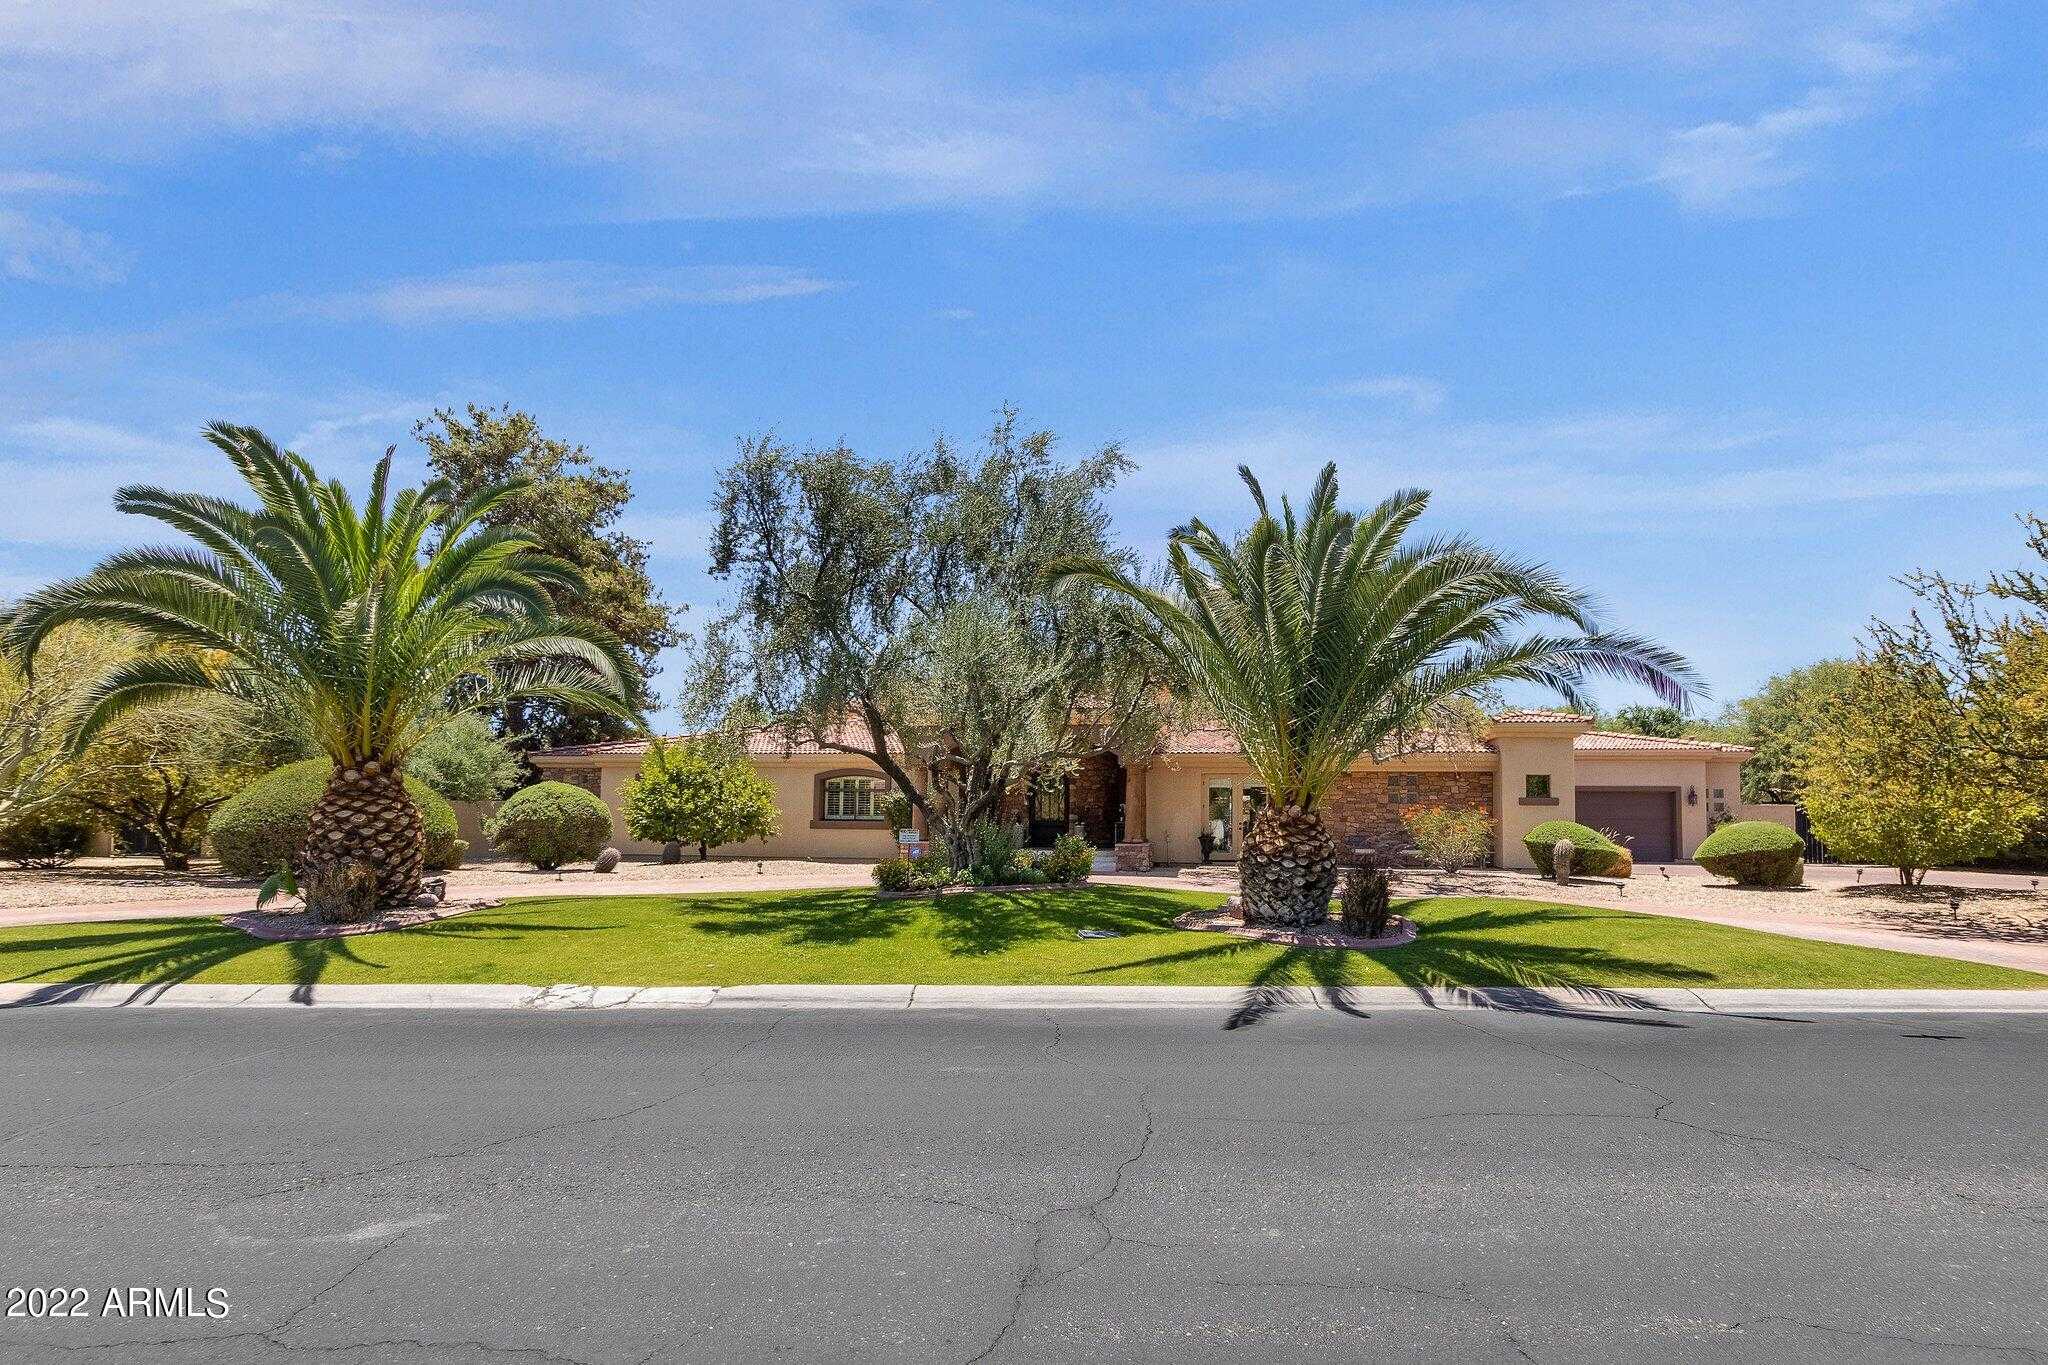 $3,450,000 - 7Br/8Ba - Home for Sale in Doubletree Estates, Paradise Valley